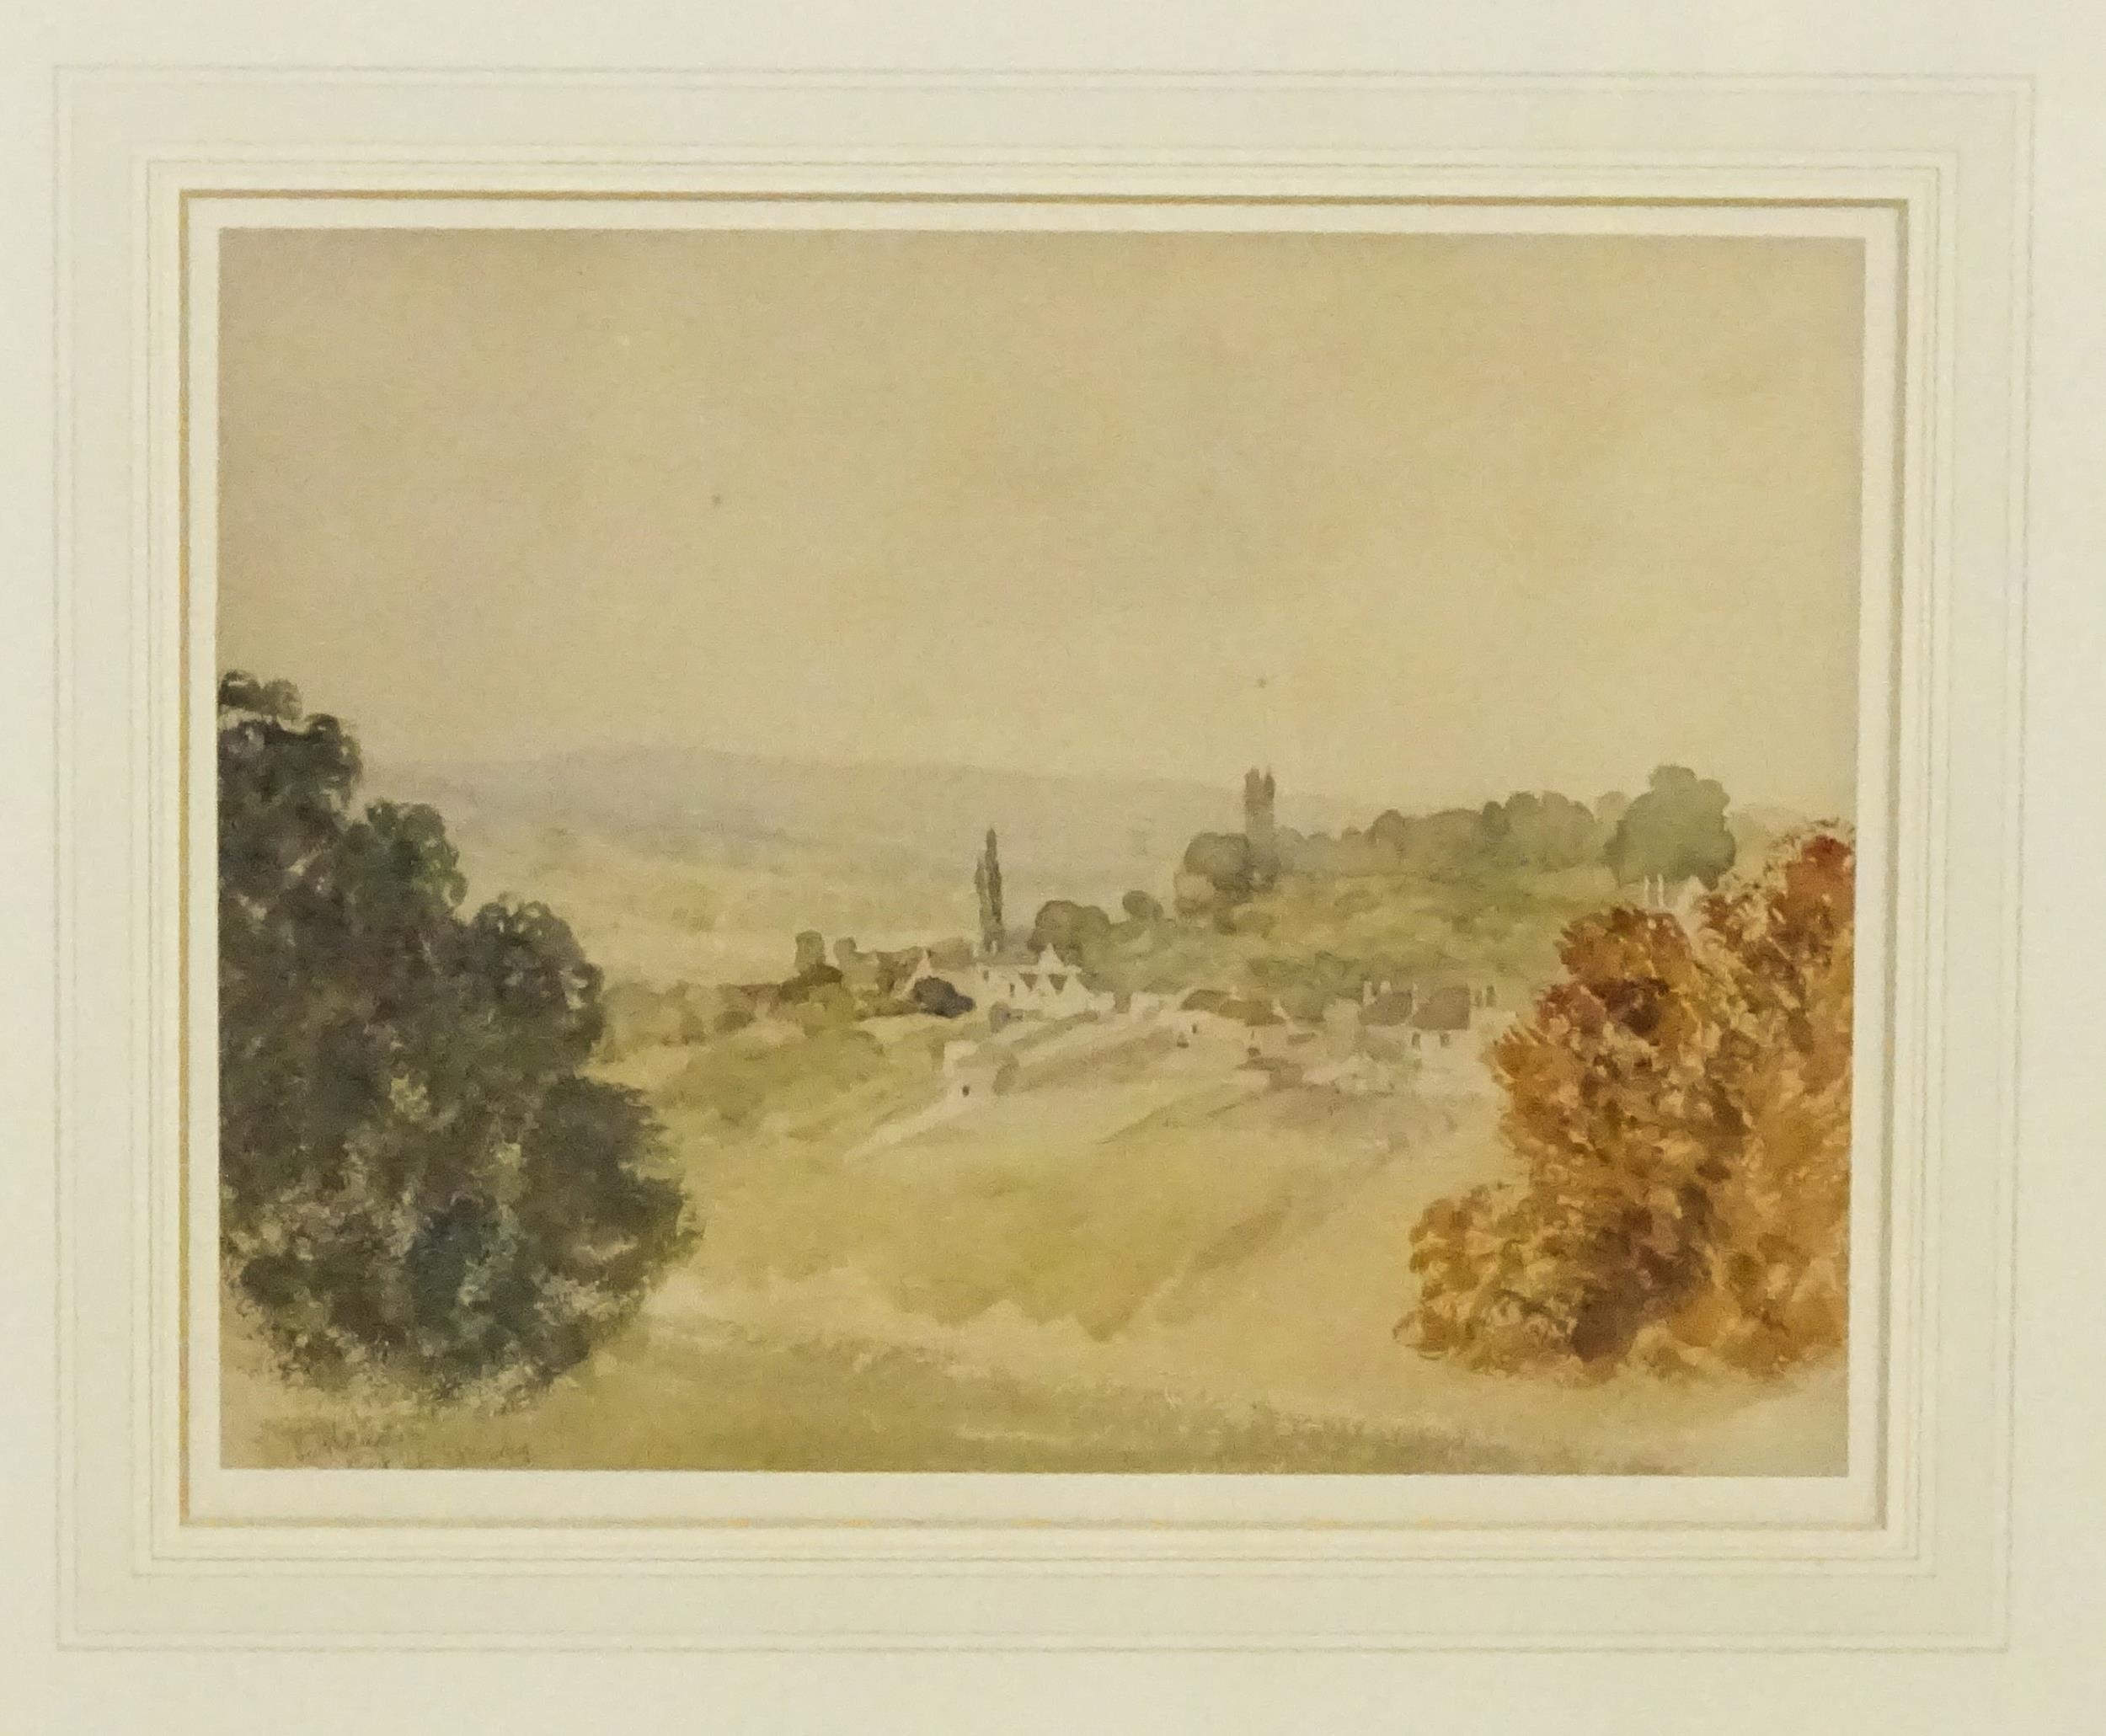 G. Marks, 19th century, Watercolour, Batheaston (Avon and Bath), A view of the village from across - Image 3 of 4